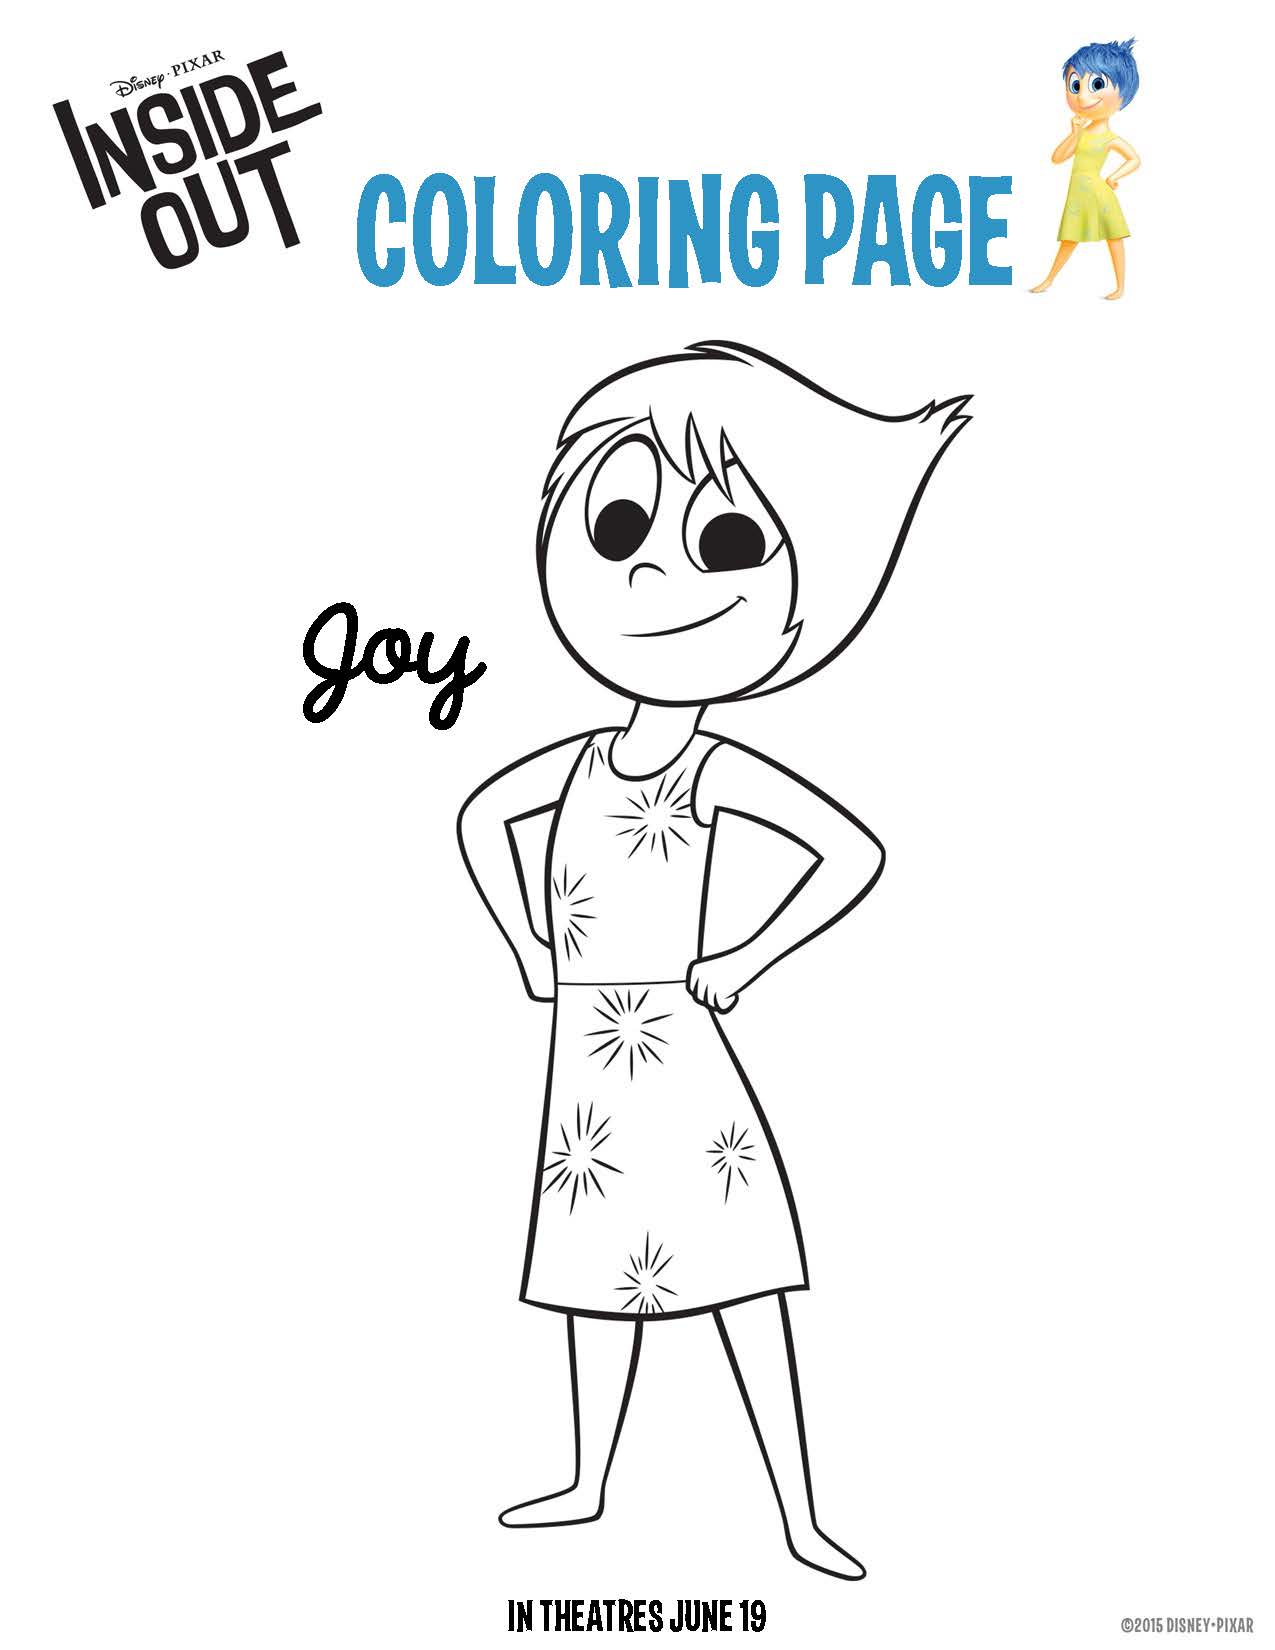 Inside Out Coloring Pages and Printables